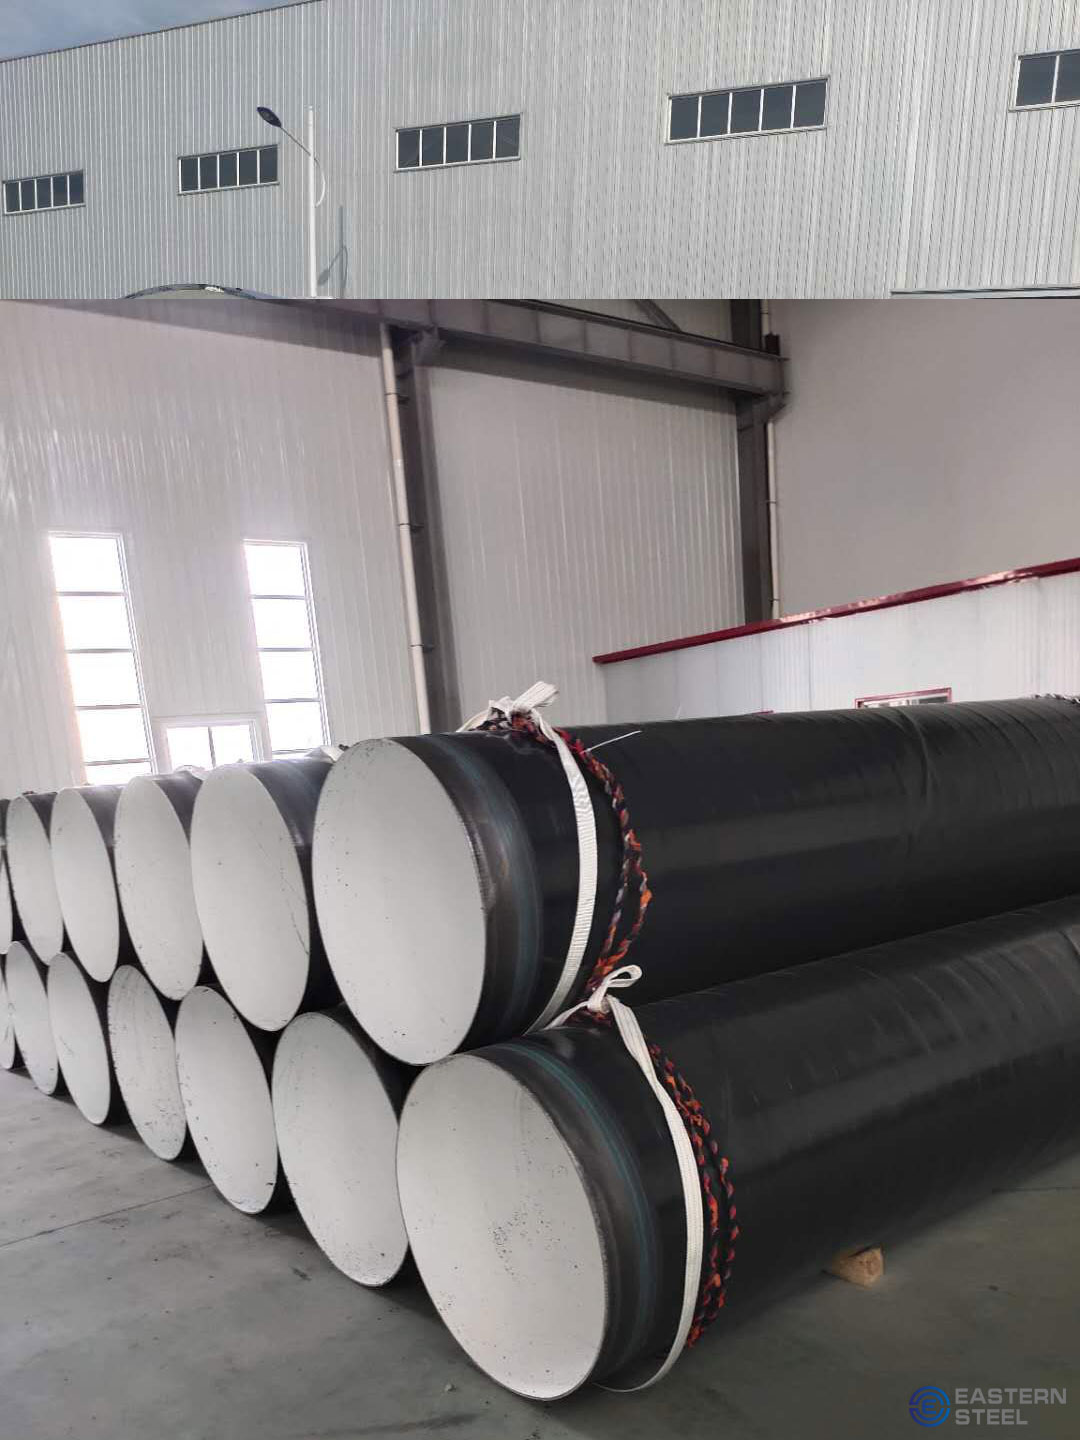 SSAW steel pipes on site are will to shipping